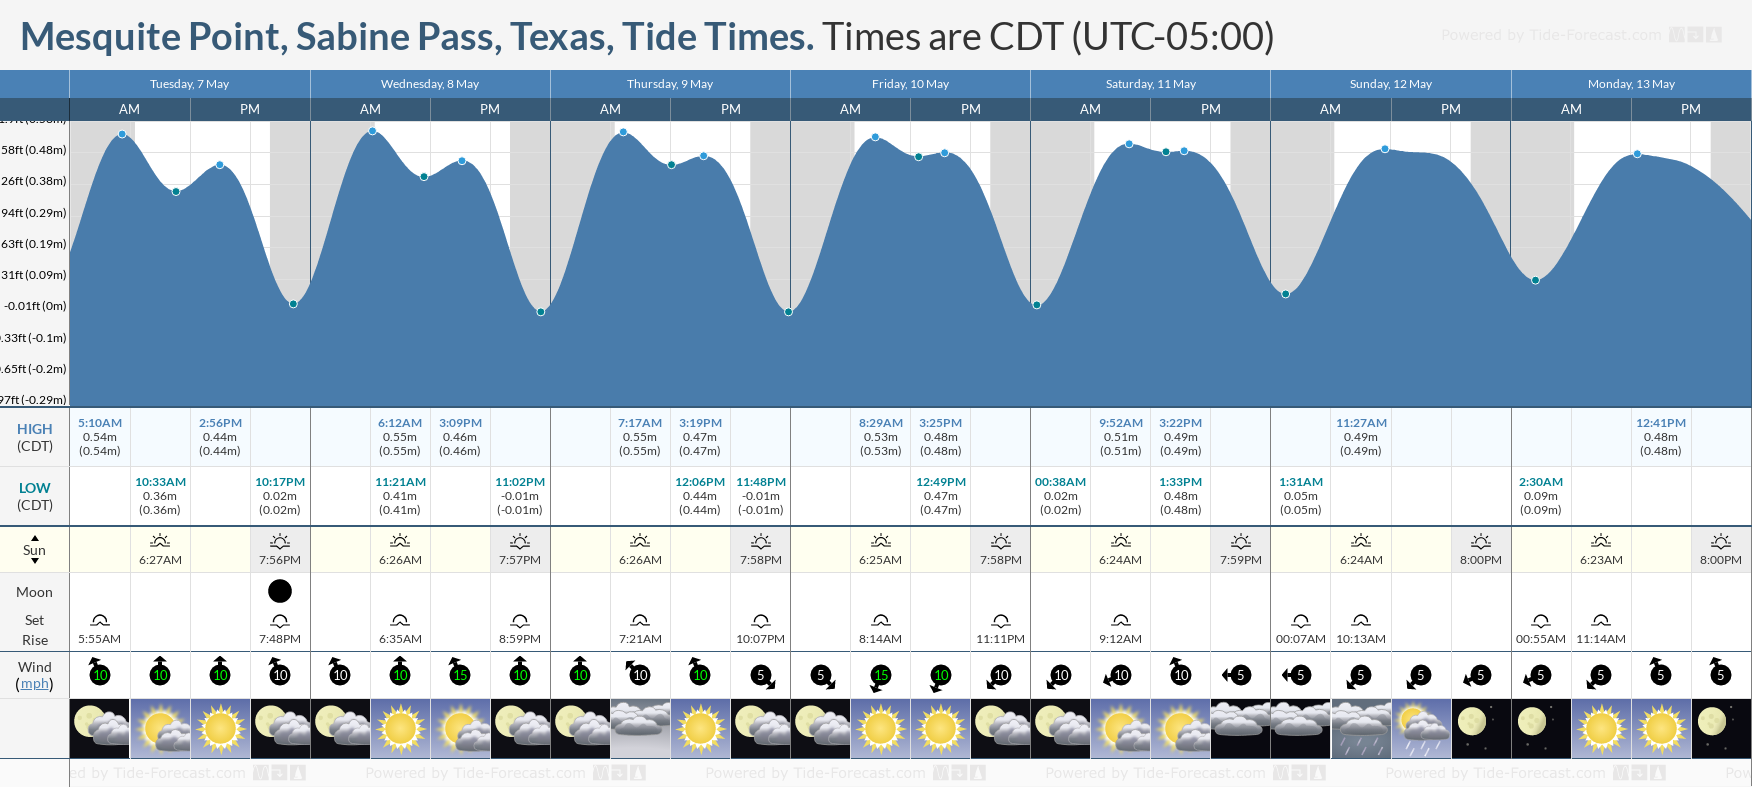 Mesquite Point, Sabine Pass, Texas Tide Chart including high and low tide tide times for the next 7 days